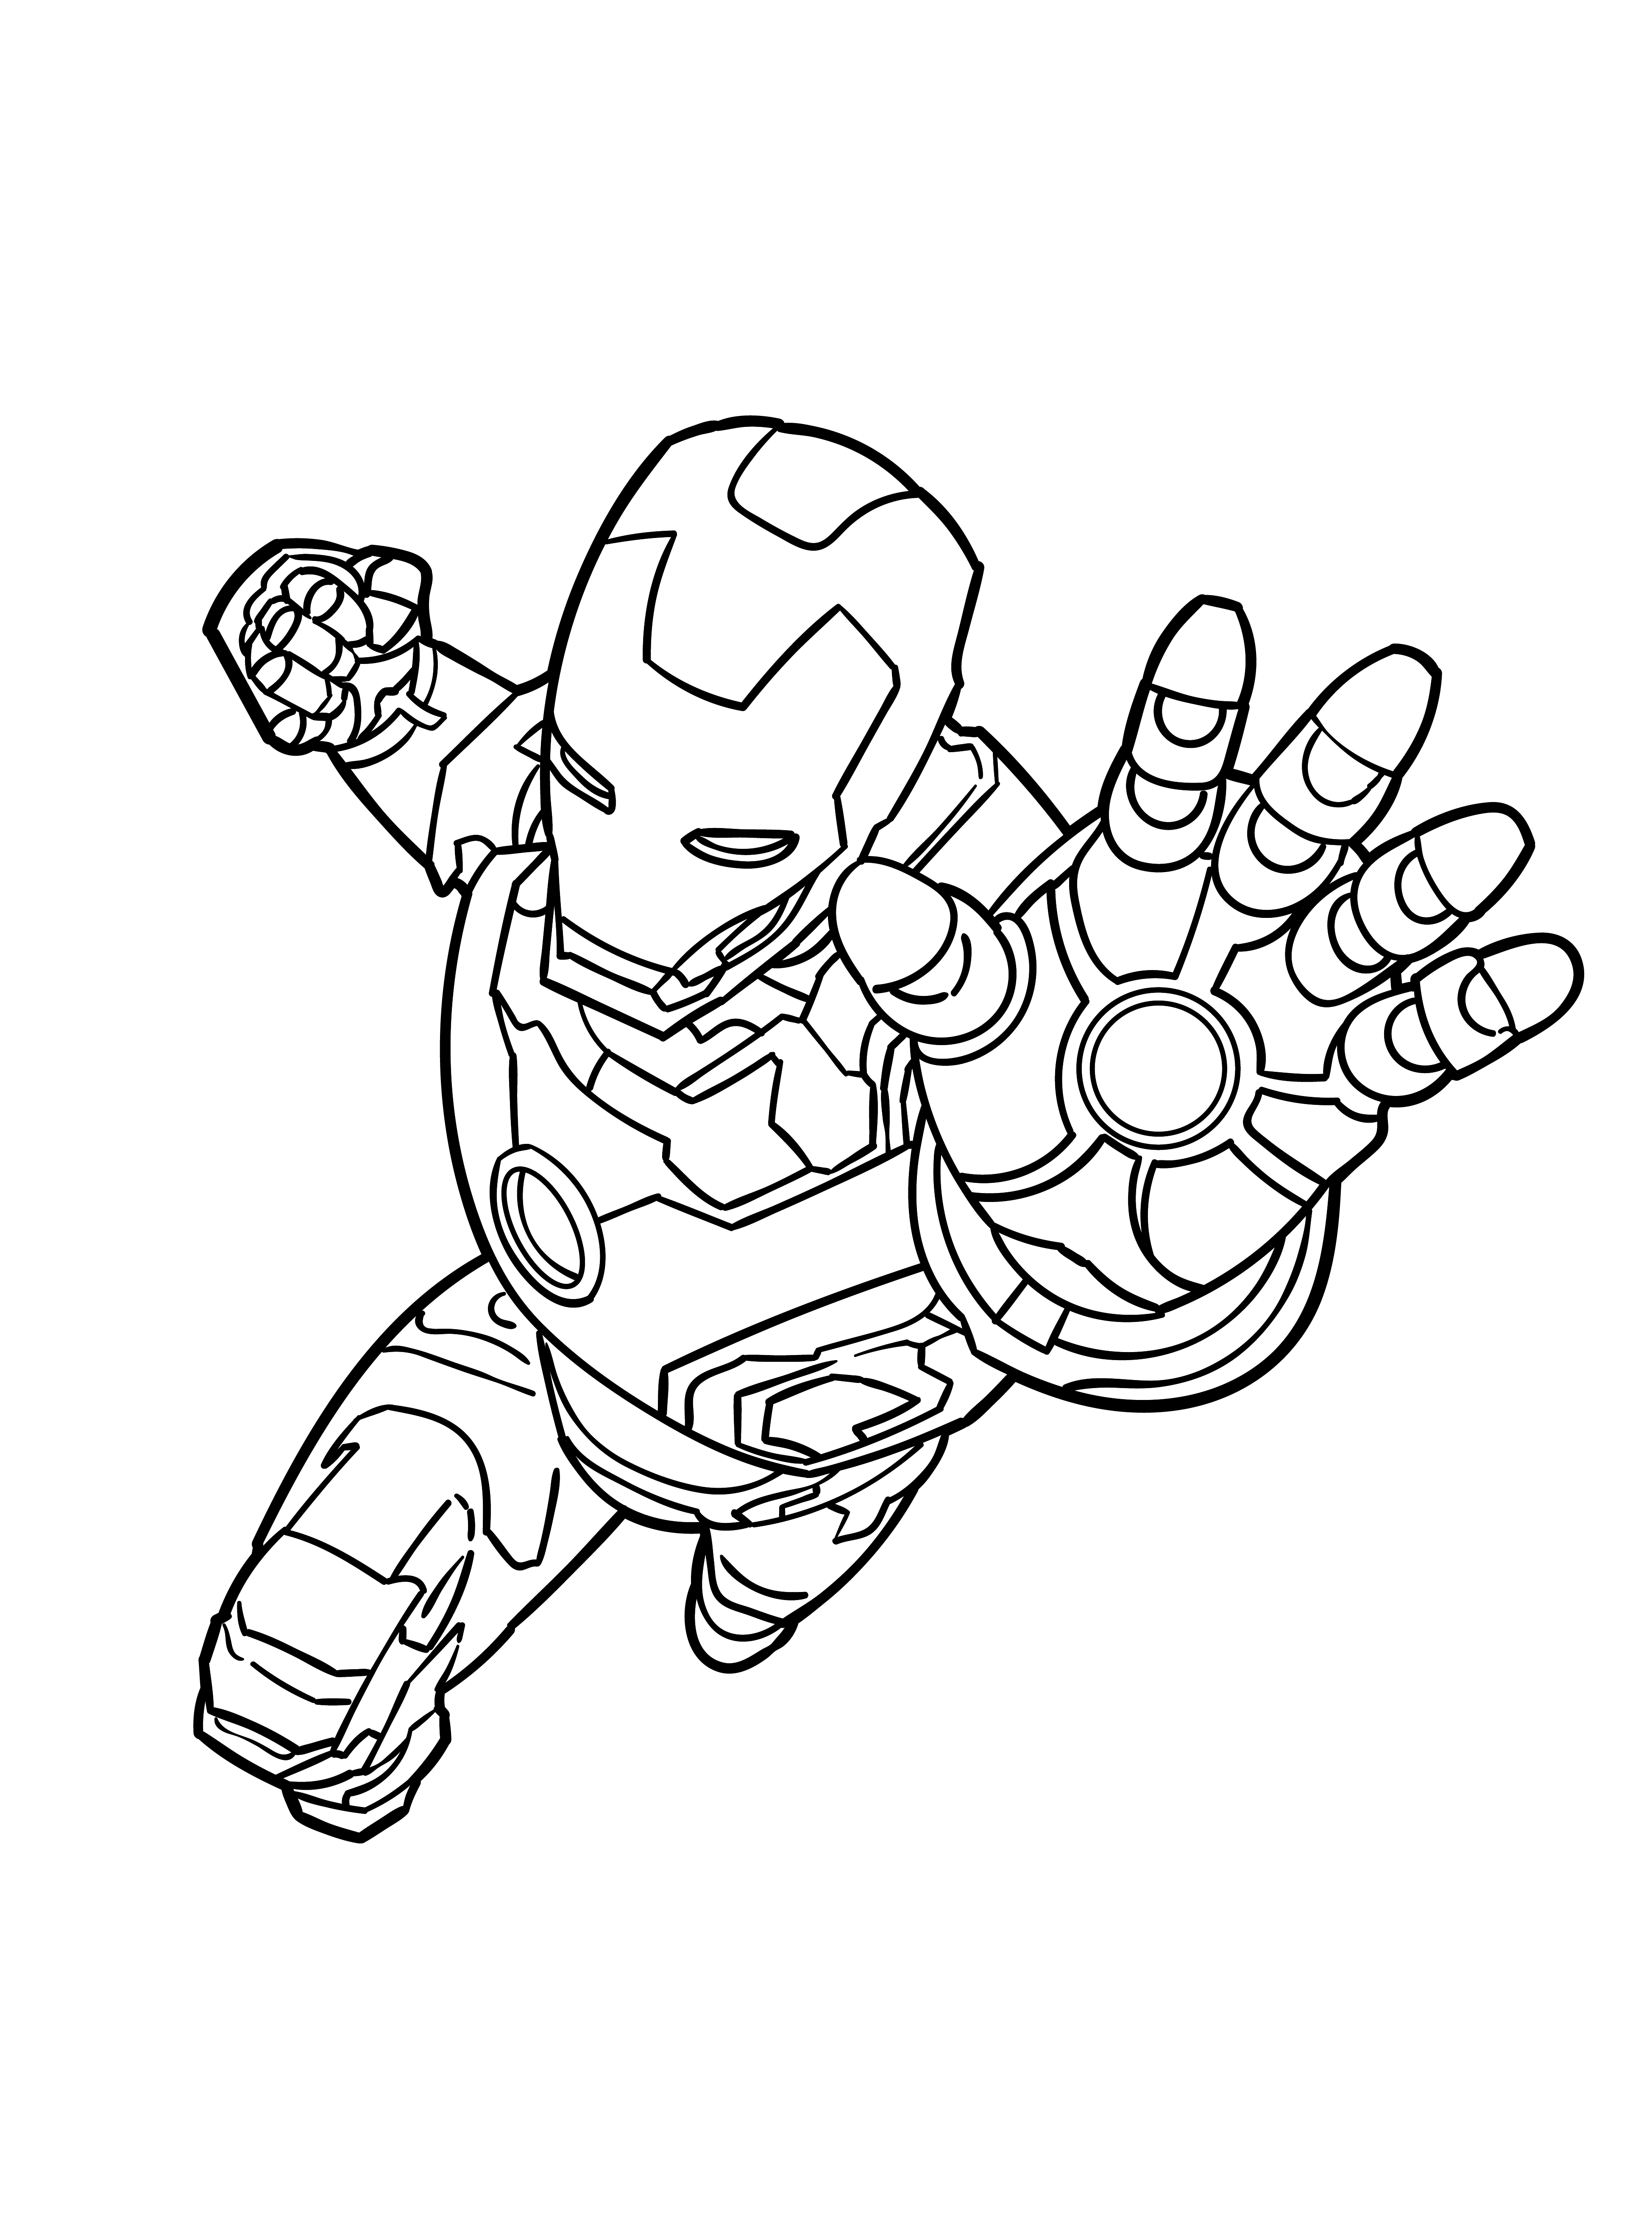 Avengers Coloring Pages 1